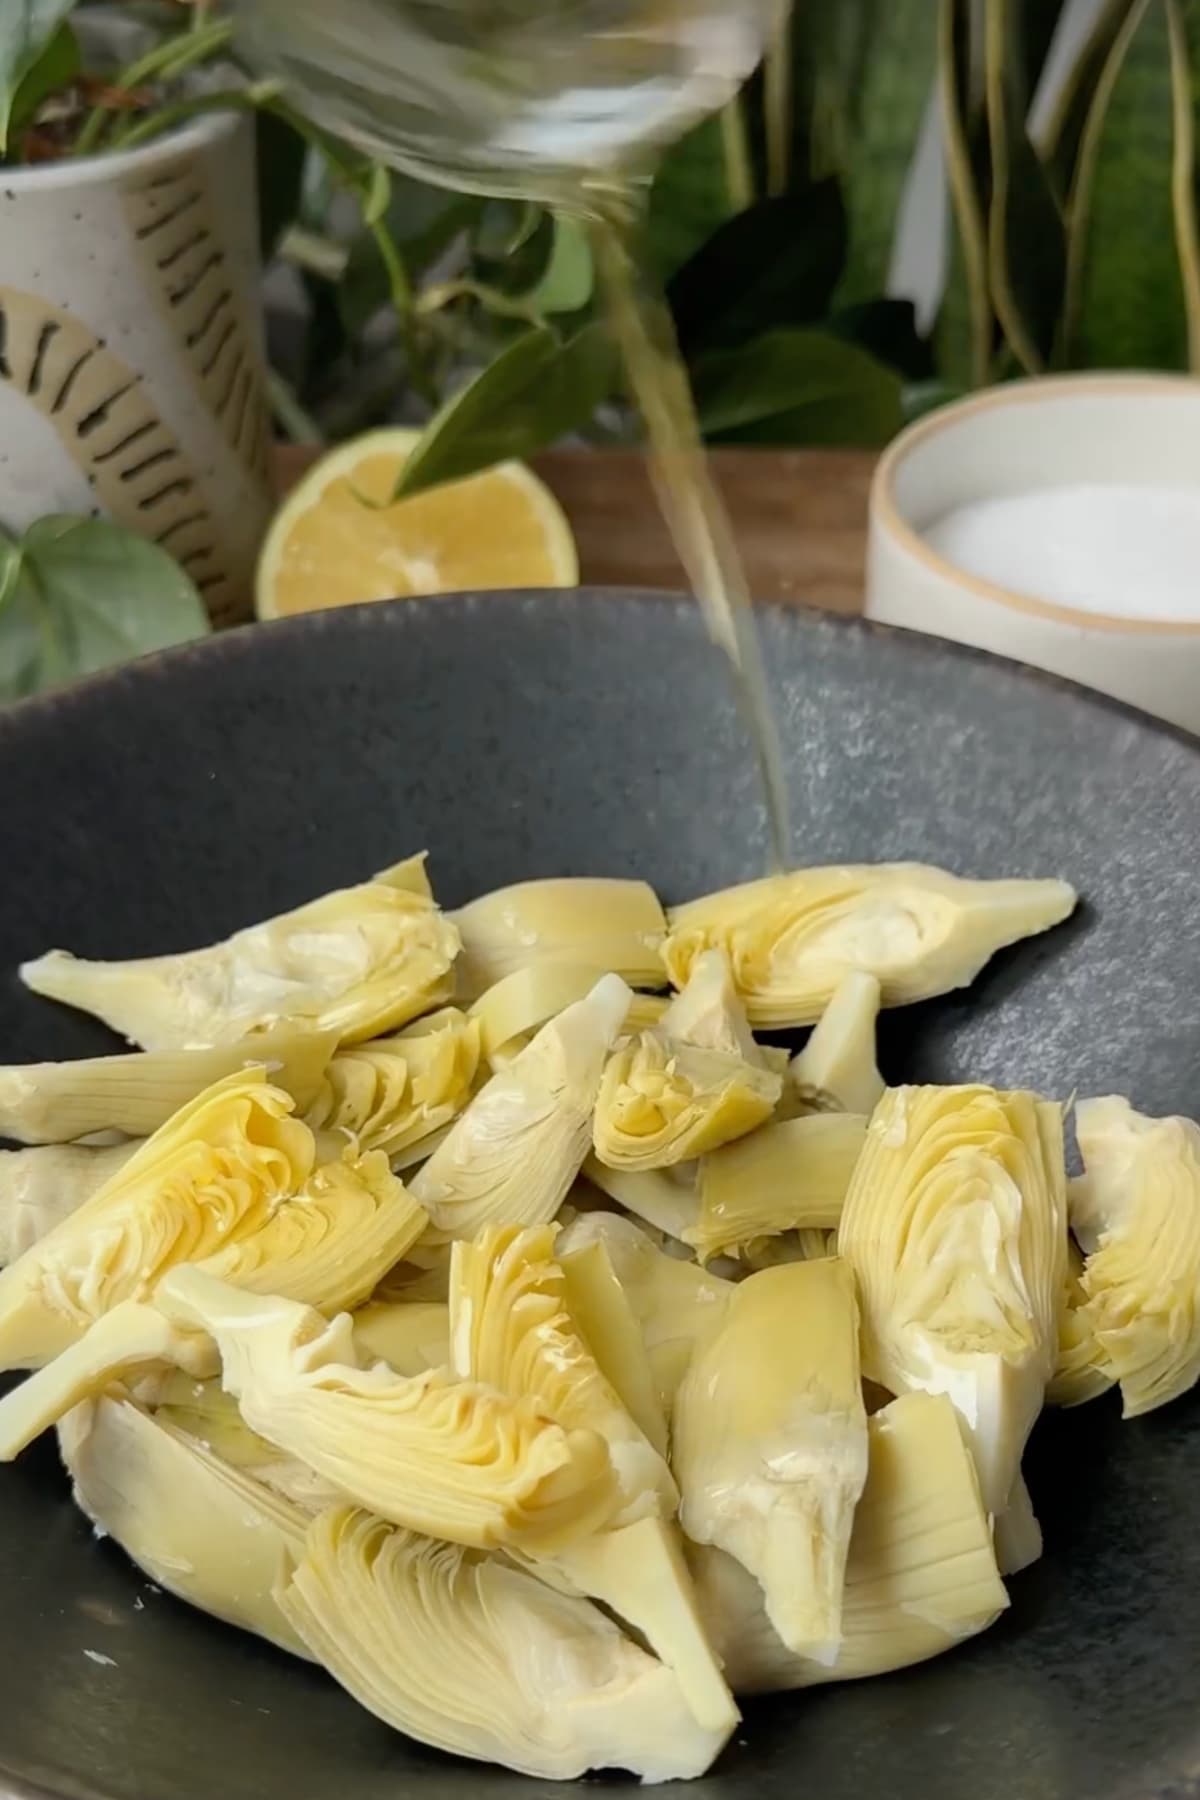 Coating artichokes with olive oil.